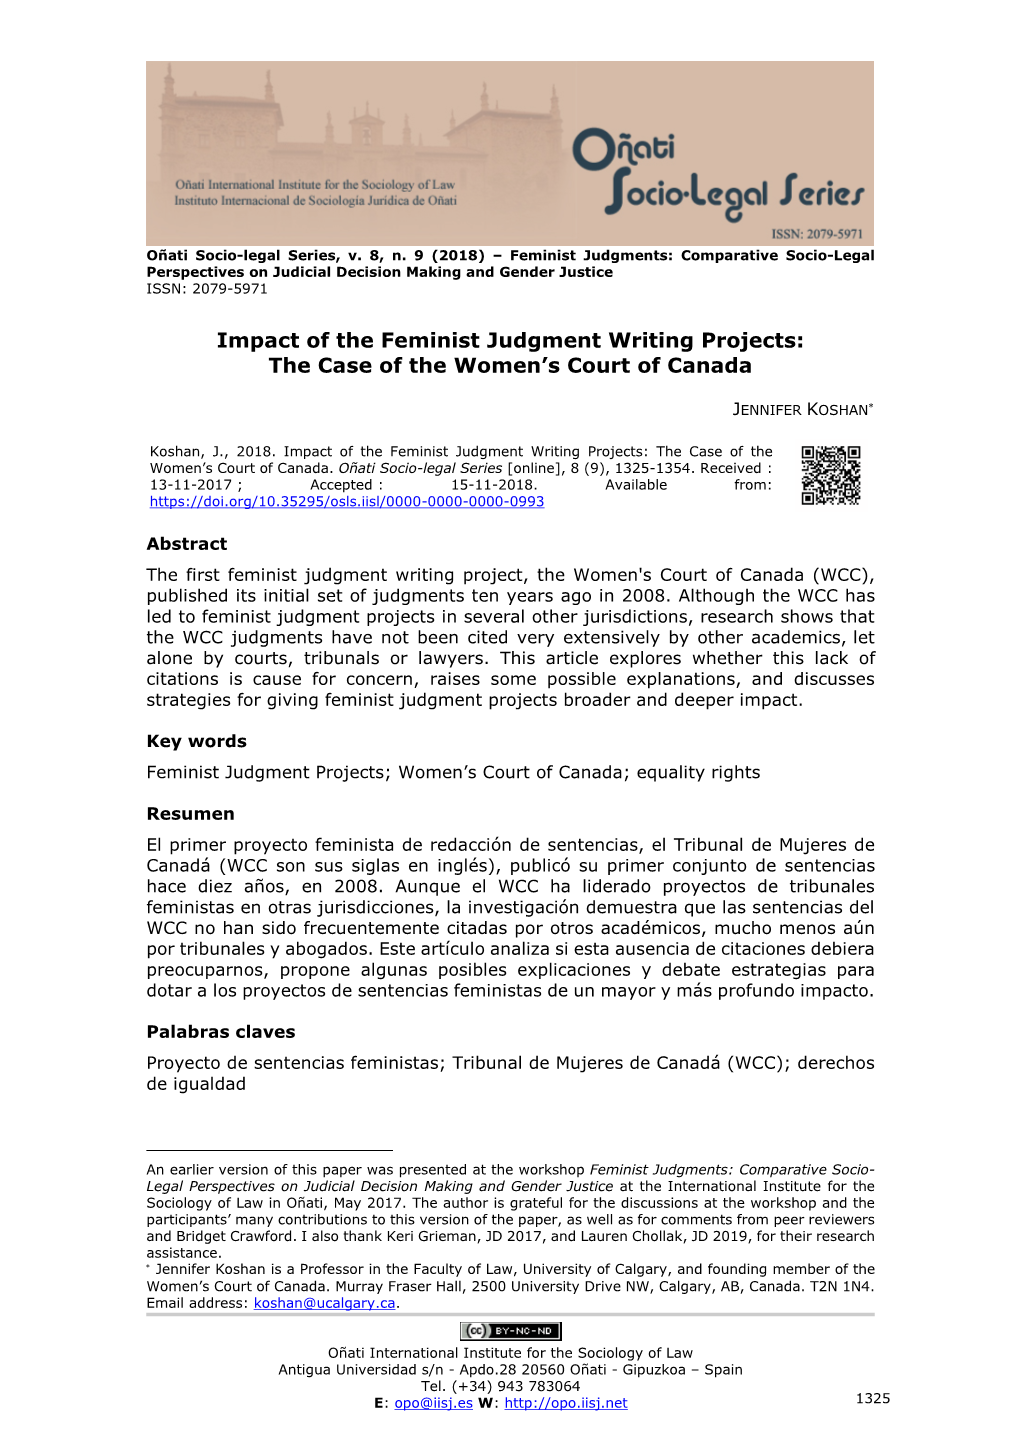 Impact of the Feminist Judgment Writing Projects: the Case of the Women’S Court of Canada